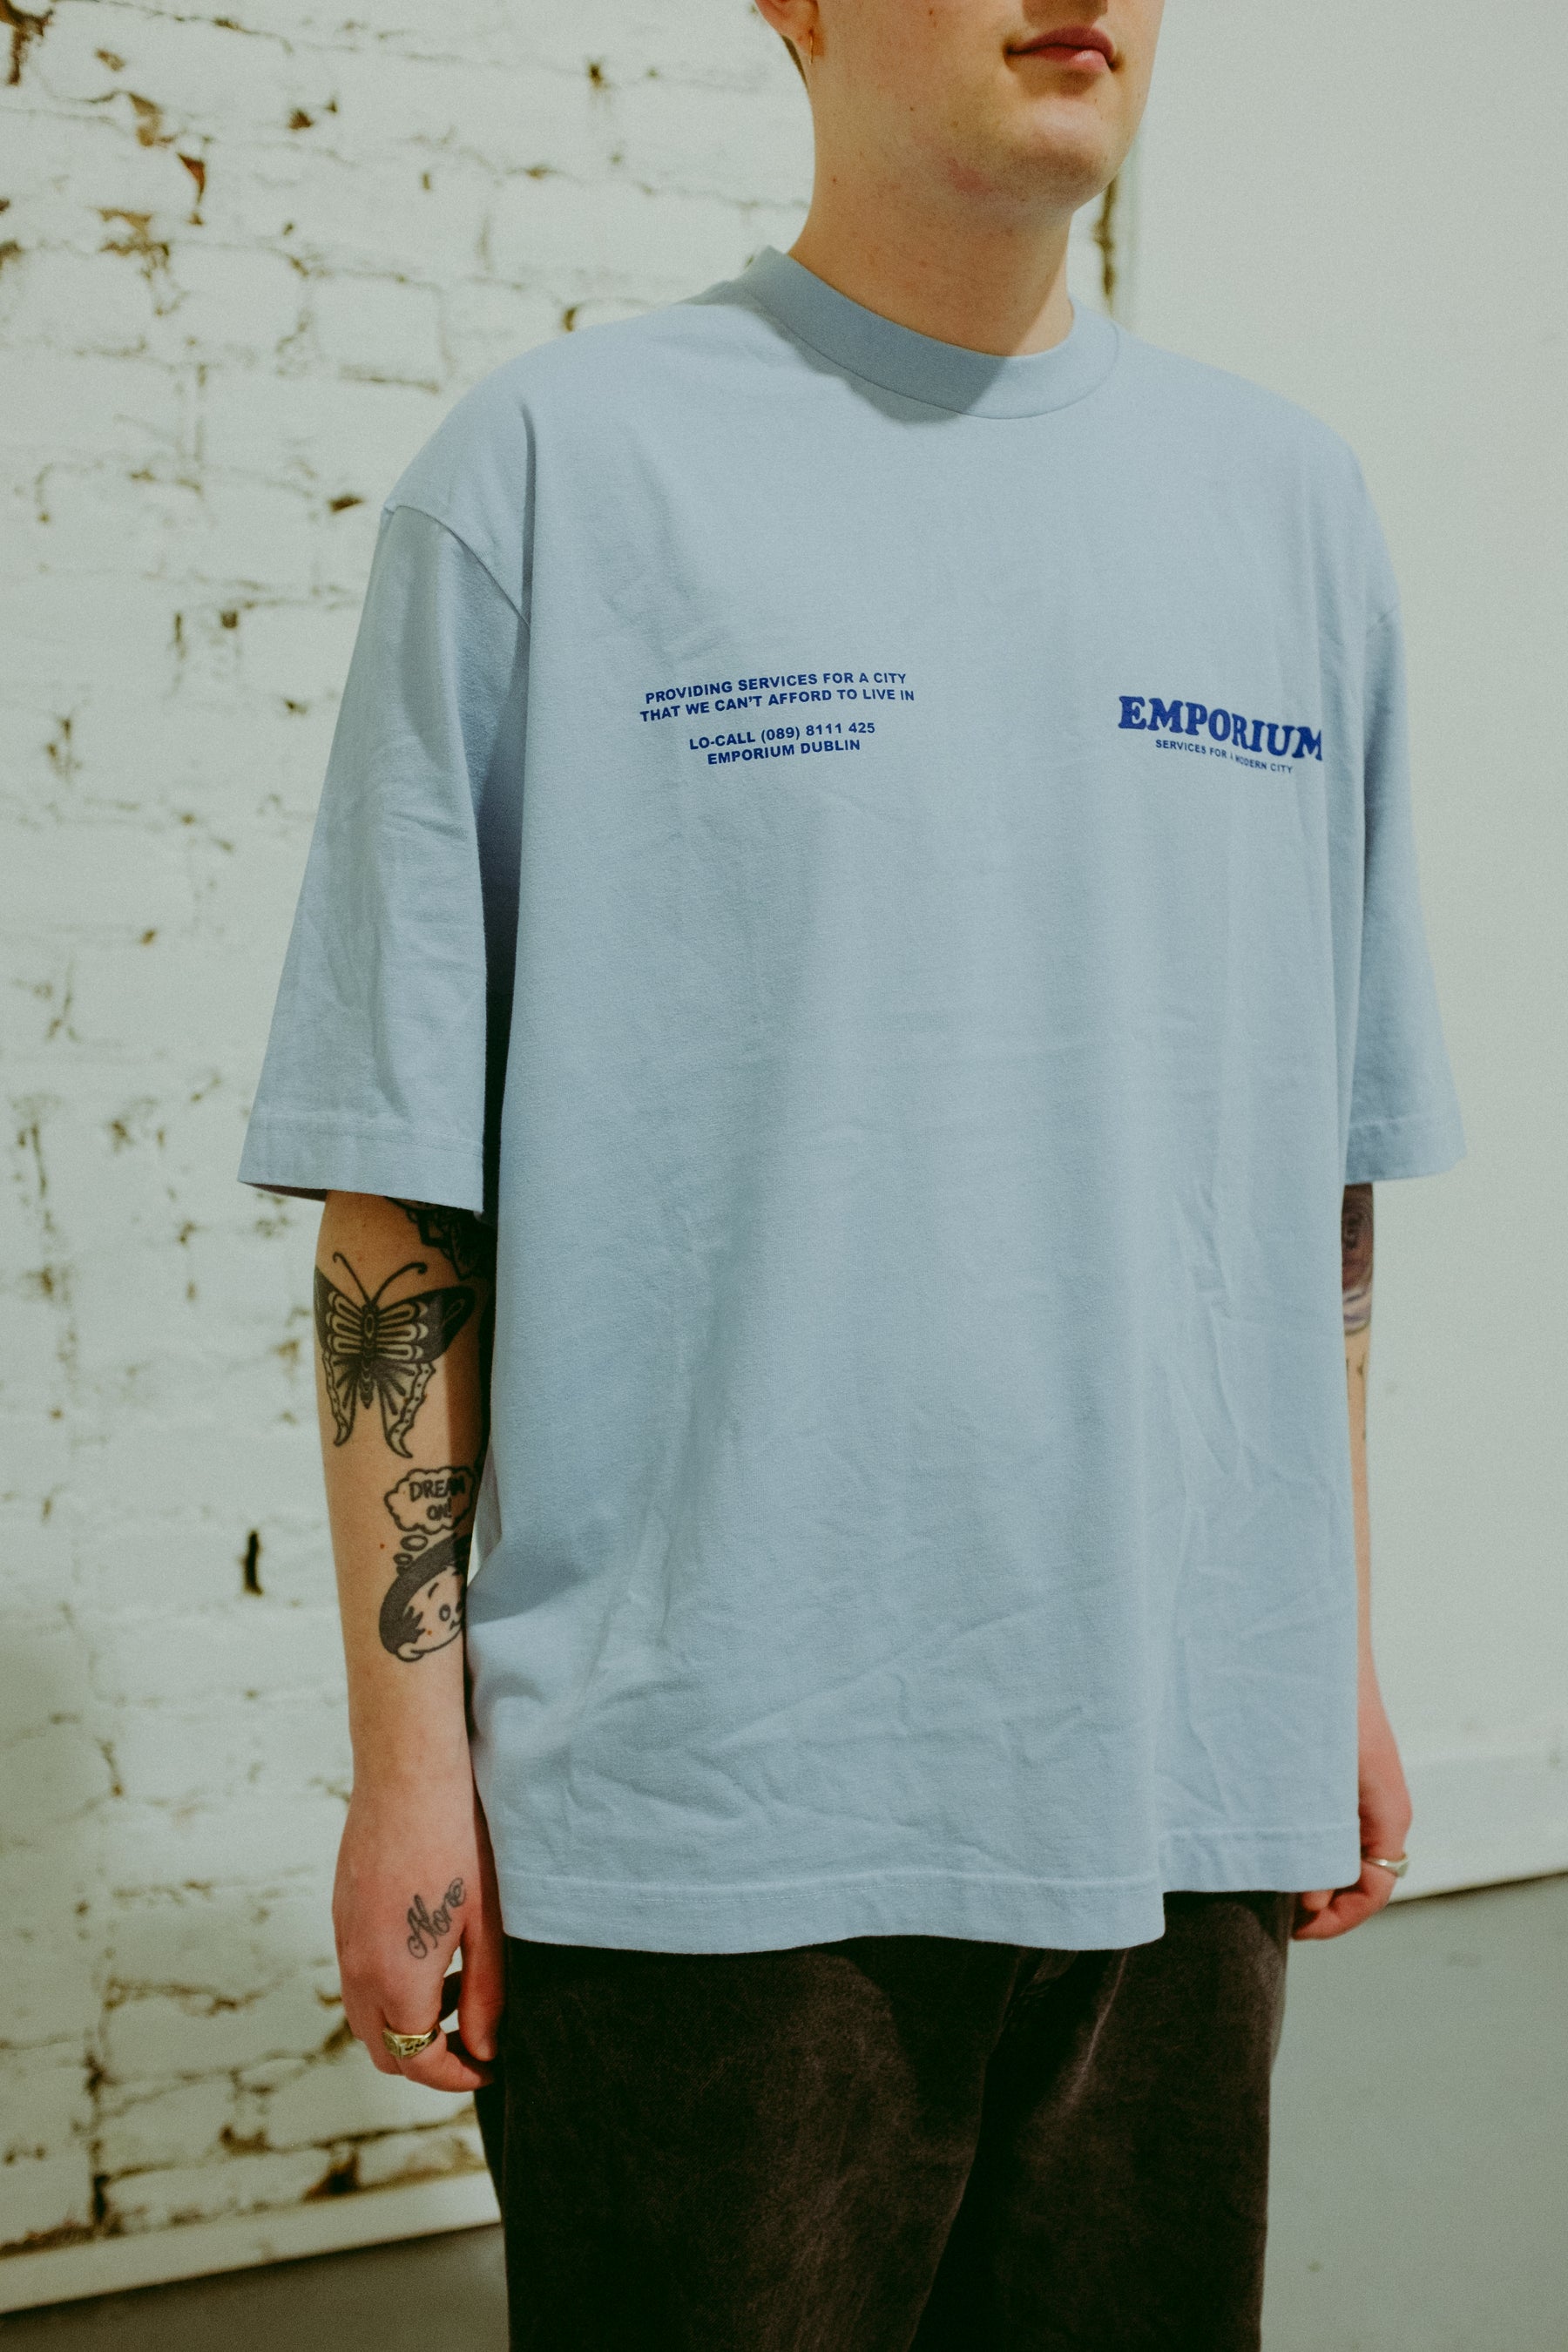 <span style="color: #f50b0b;">Last One</span> EMPORIUM / CITY SERVICES T BABY BLUE